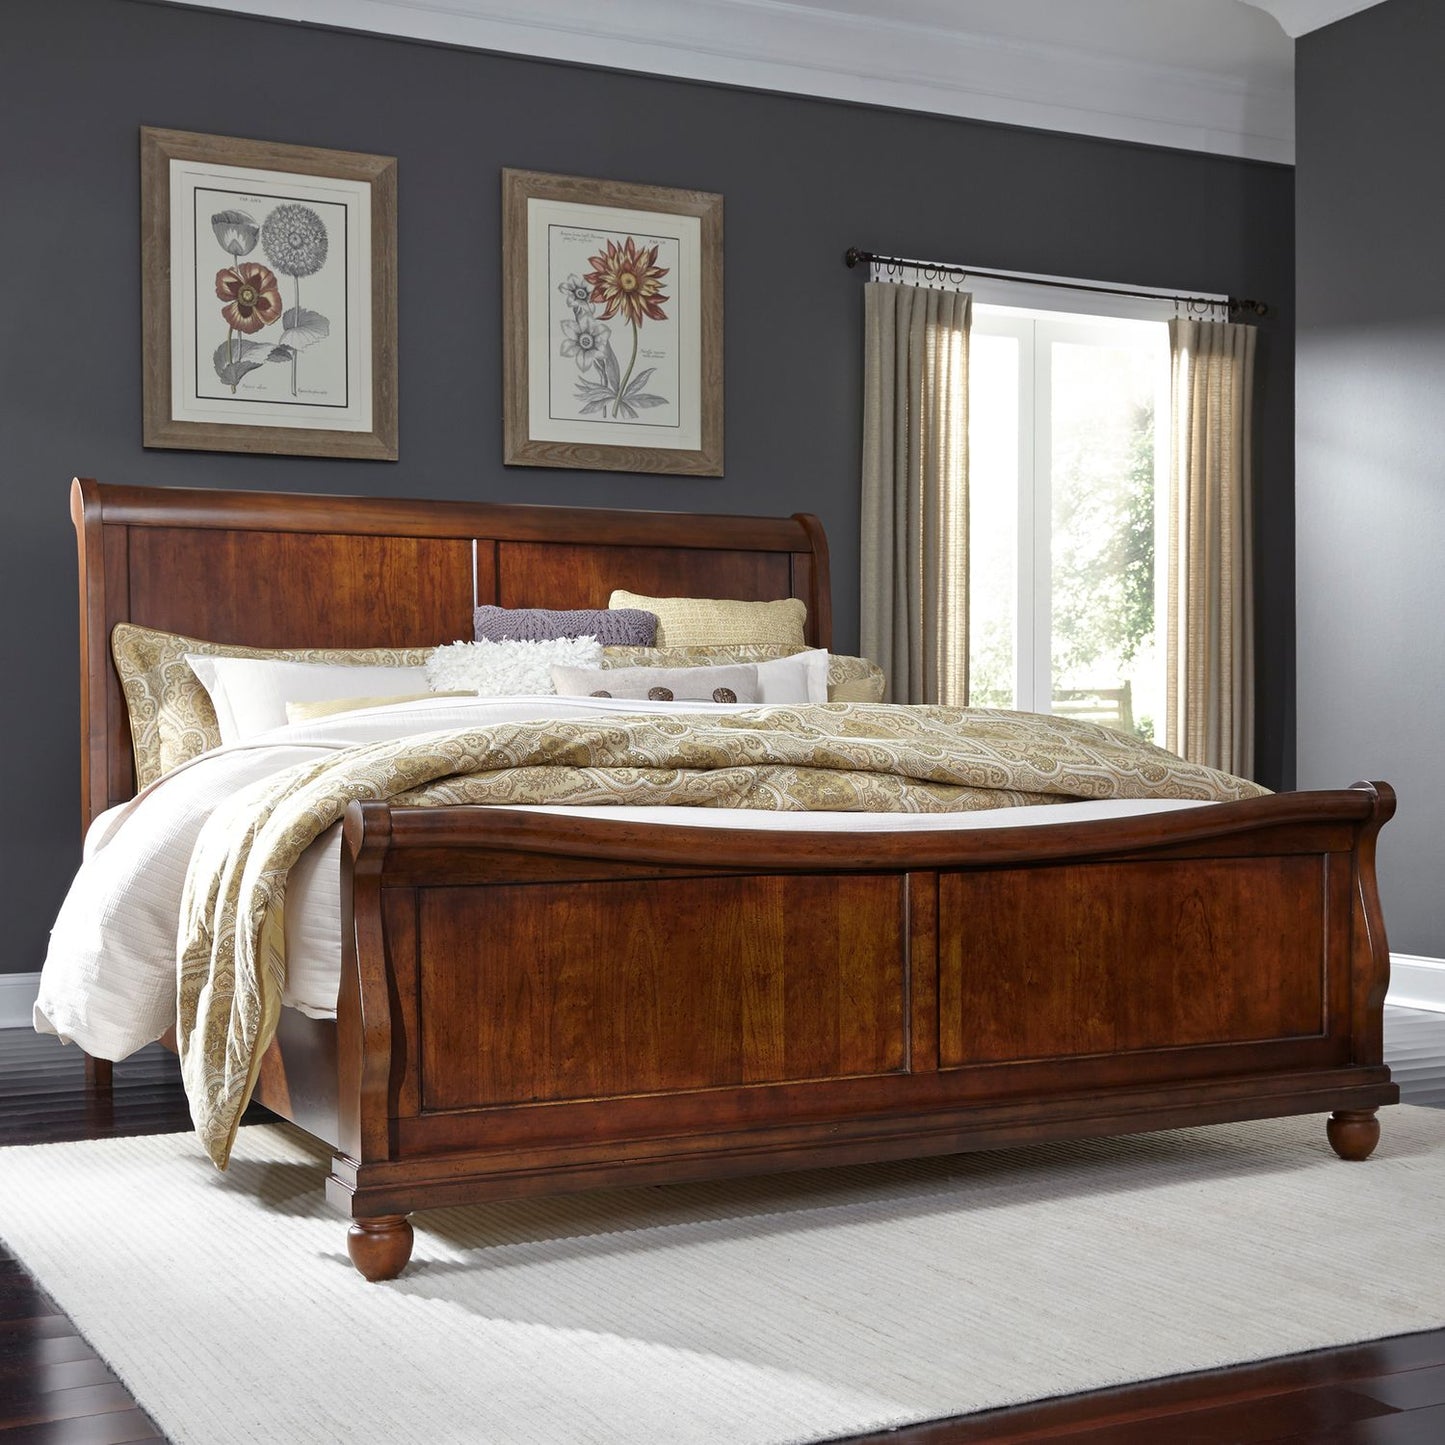 Rustic Traditions - Queen Sleigh Bed